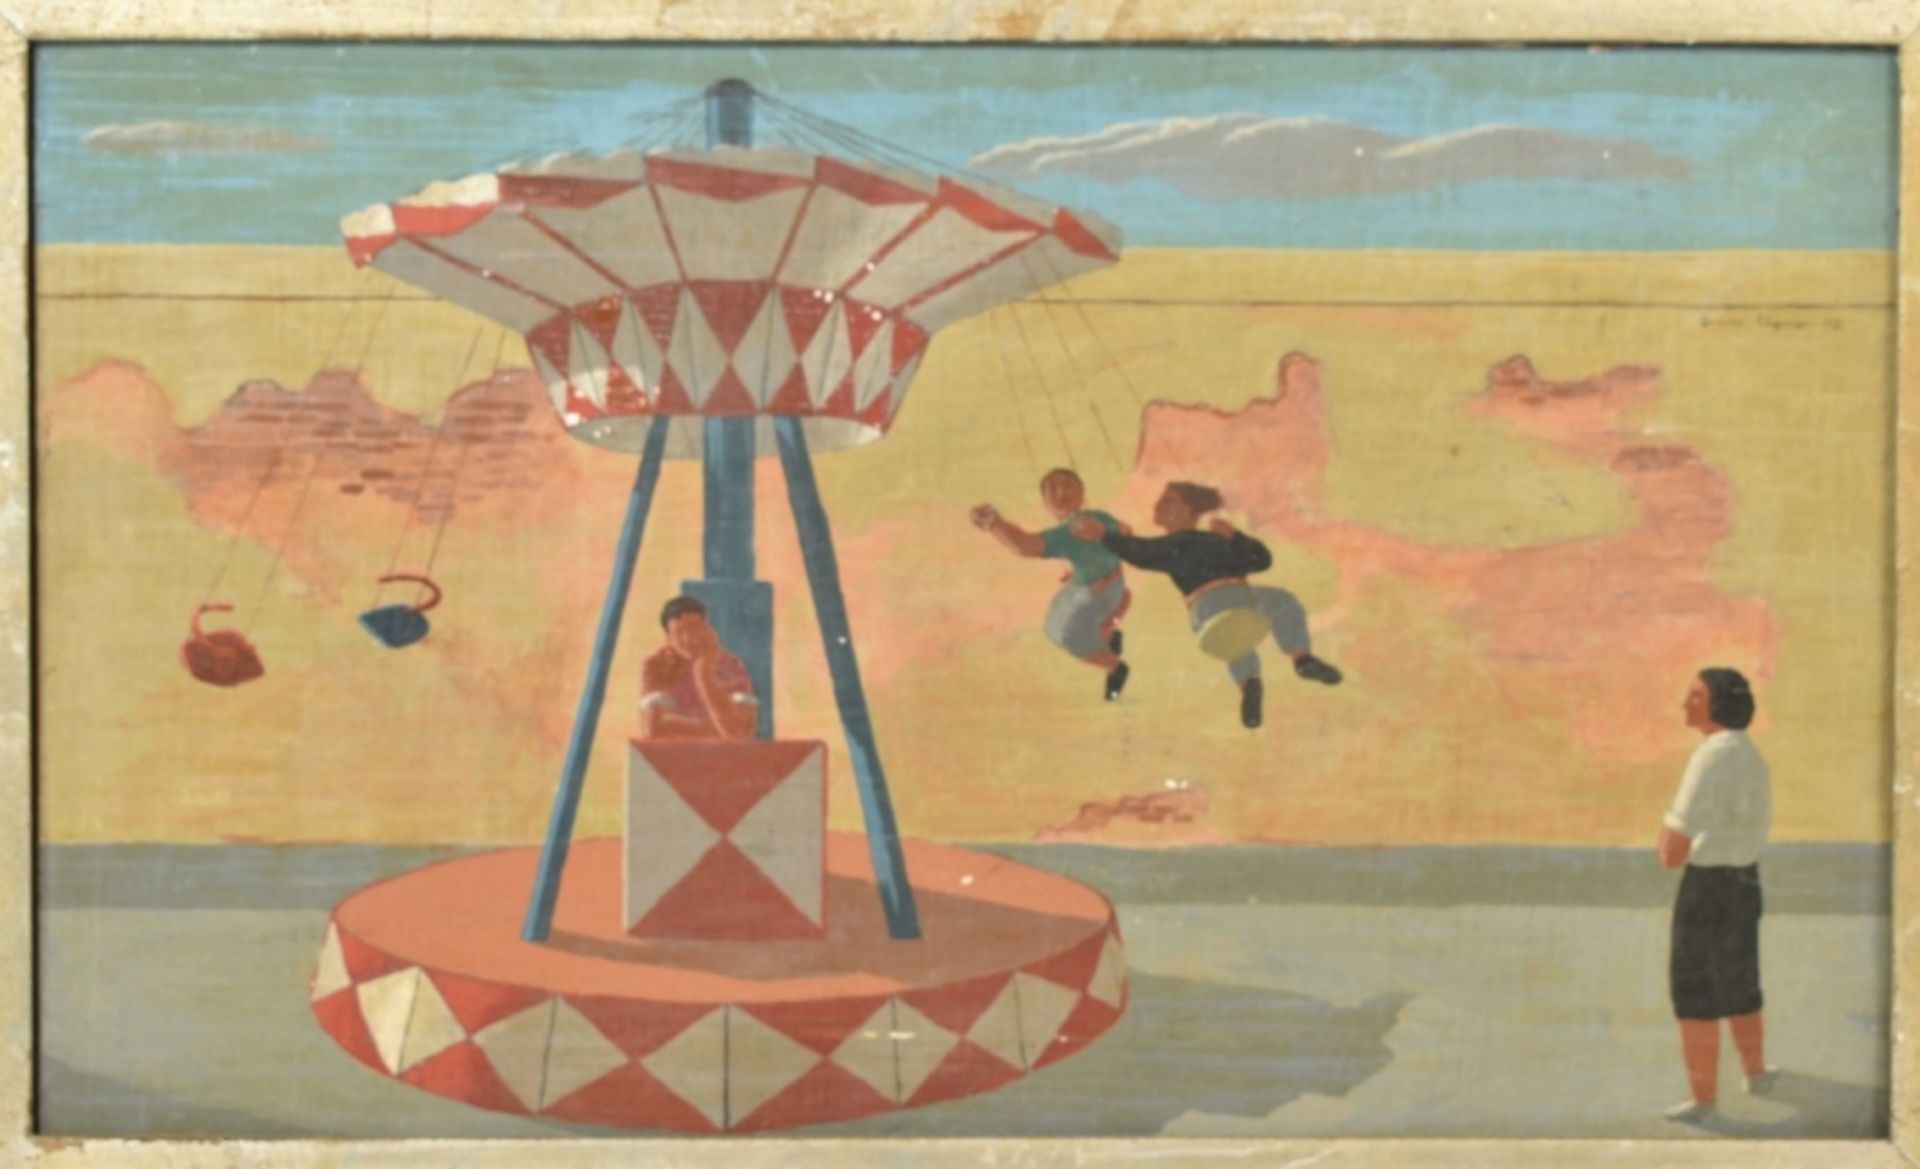 Grover Chapman (1924-2000). "Children in a swing ride" - Image 2 of 6